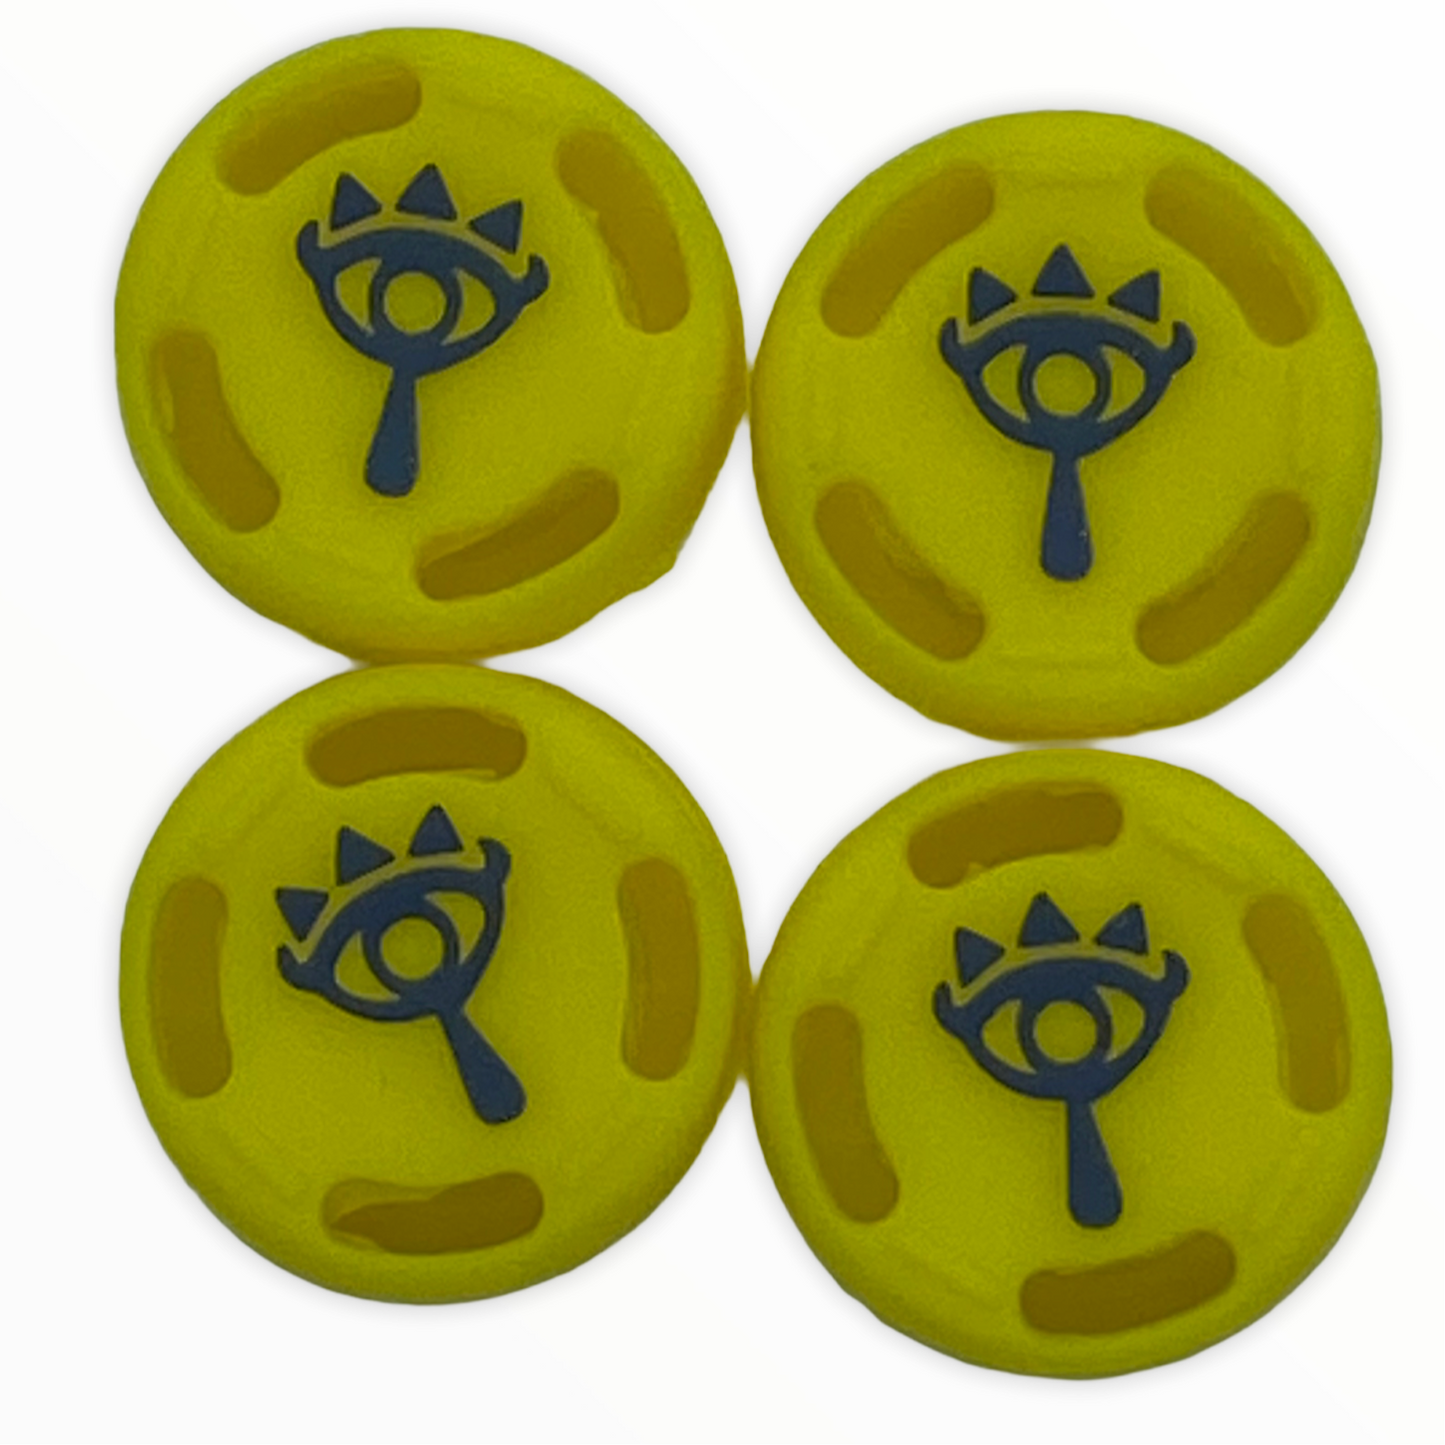 JenDore Yellow Eyes 4Pcs Silicone Thumb Grip Caps for Nintendo Switch